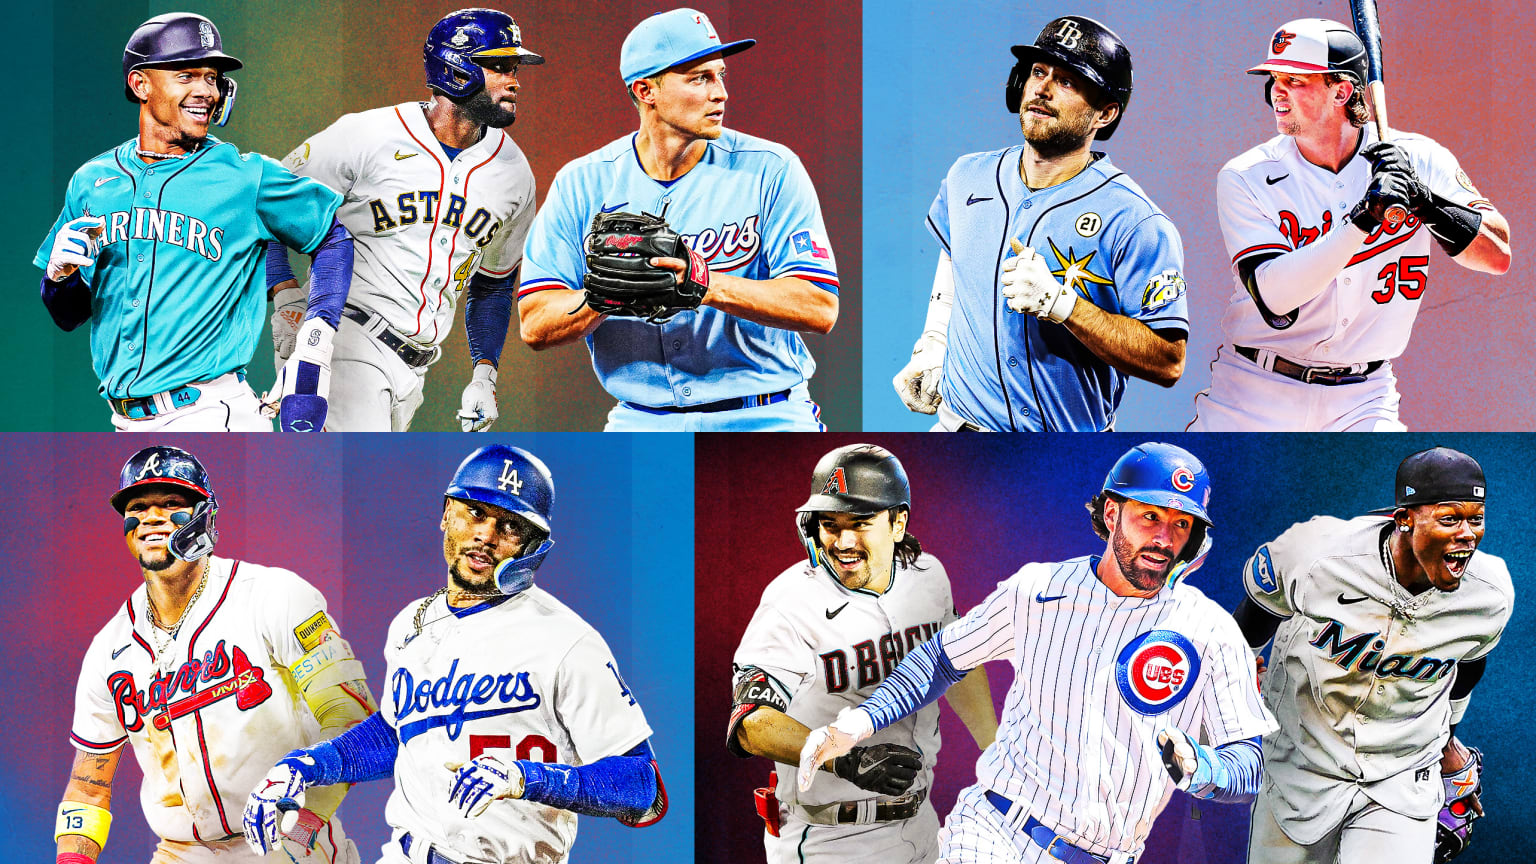 10 players are pictured in four different boxes each representing a different postseason race